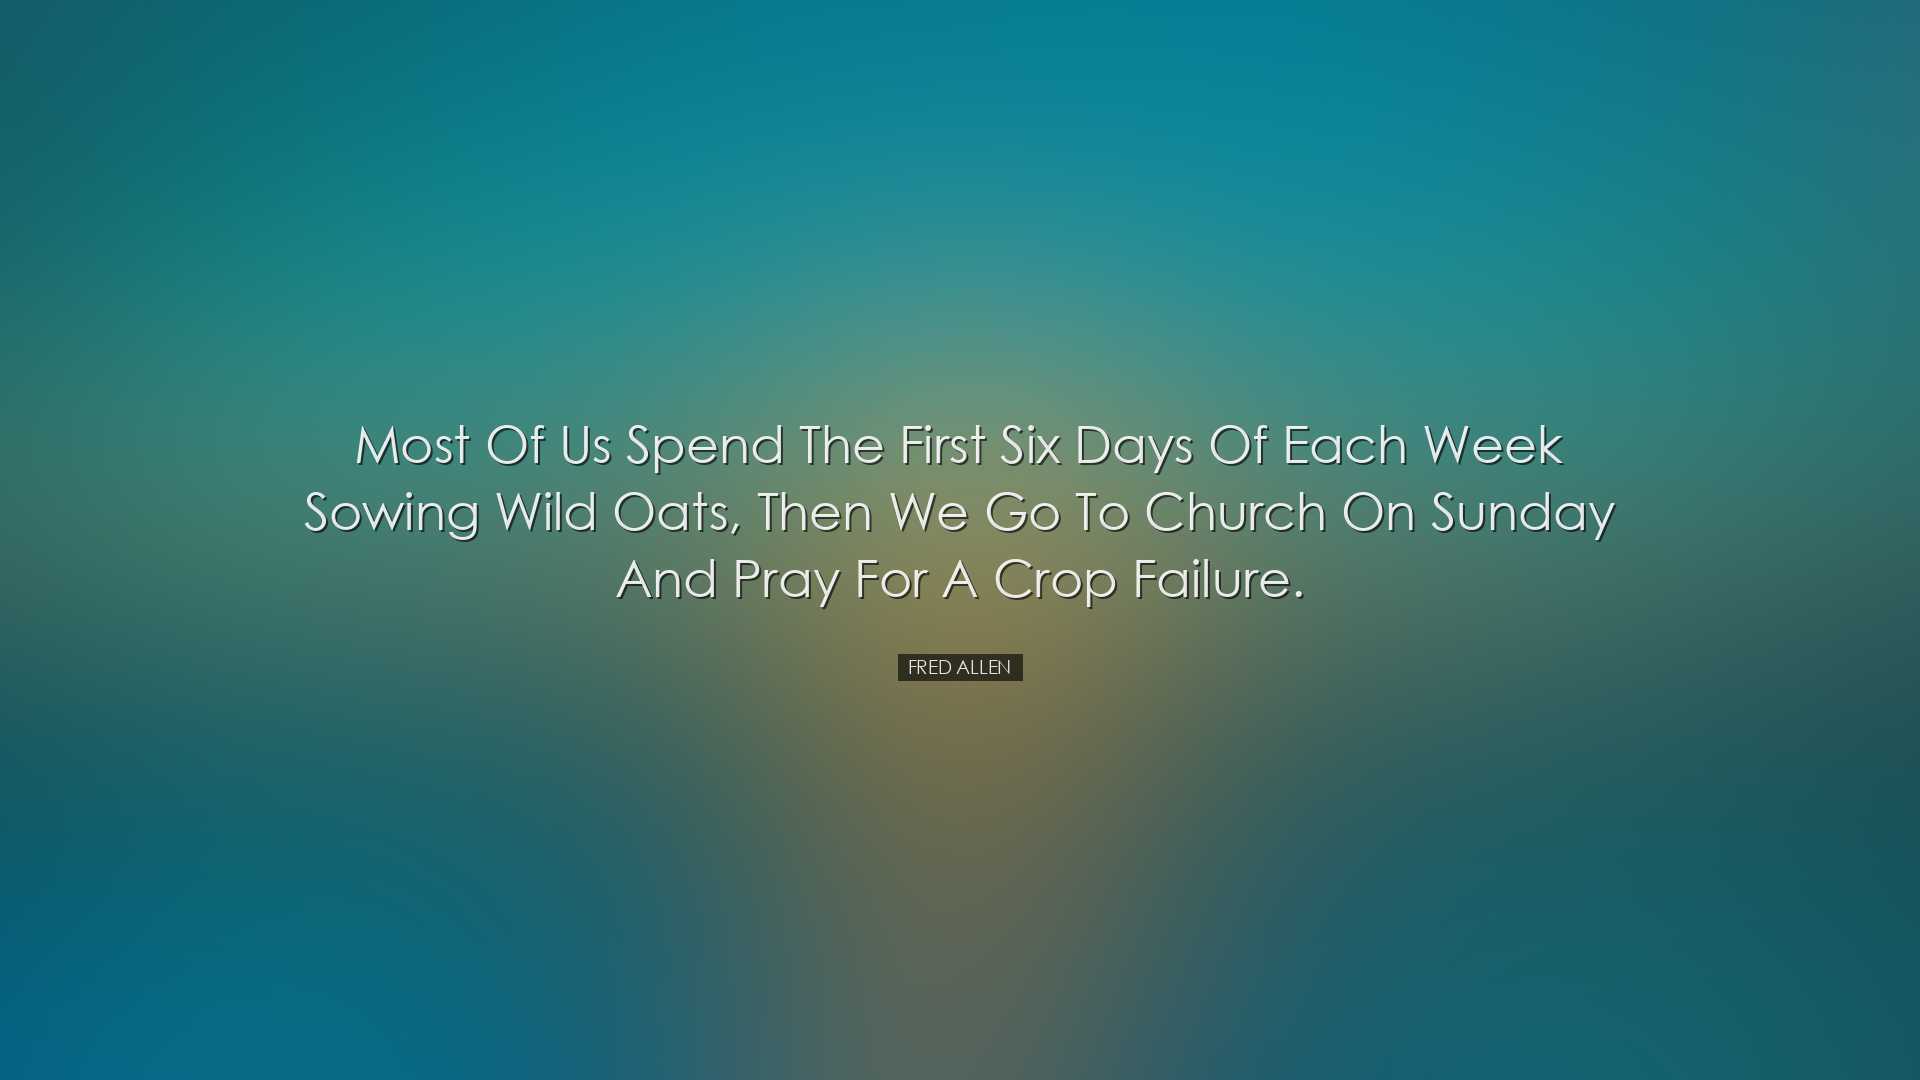 Most of us spend the first six days of each week sowing wild oats,